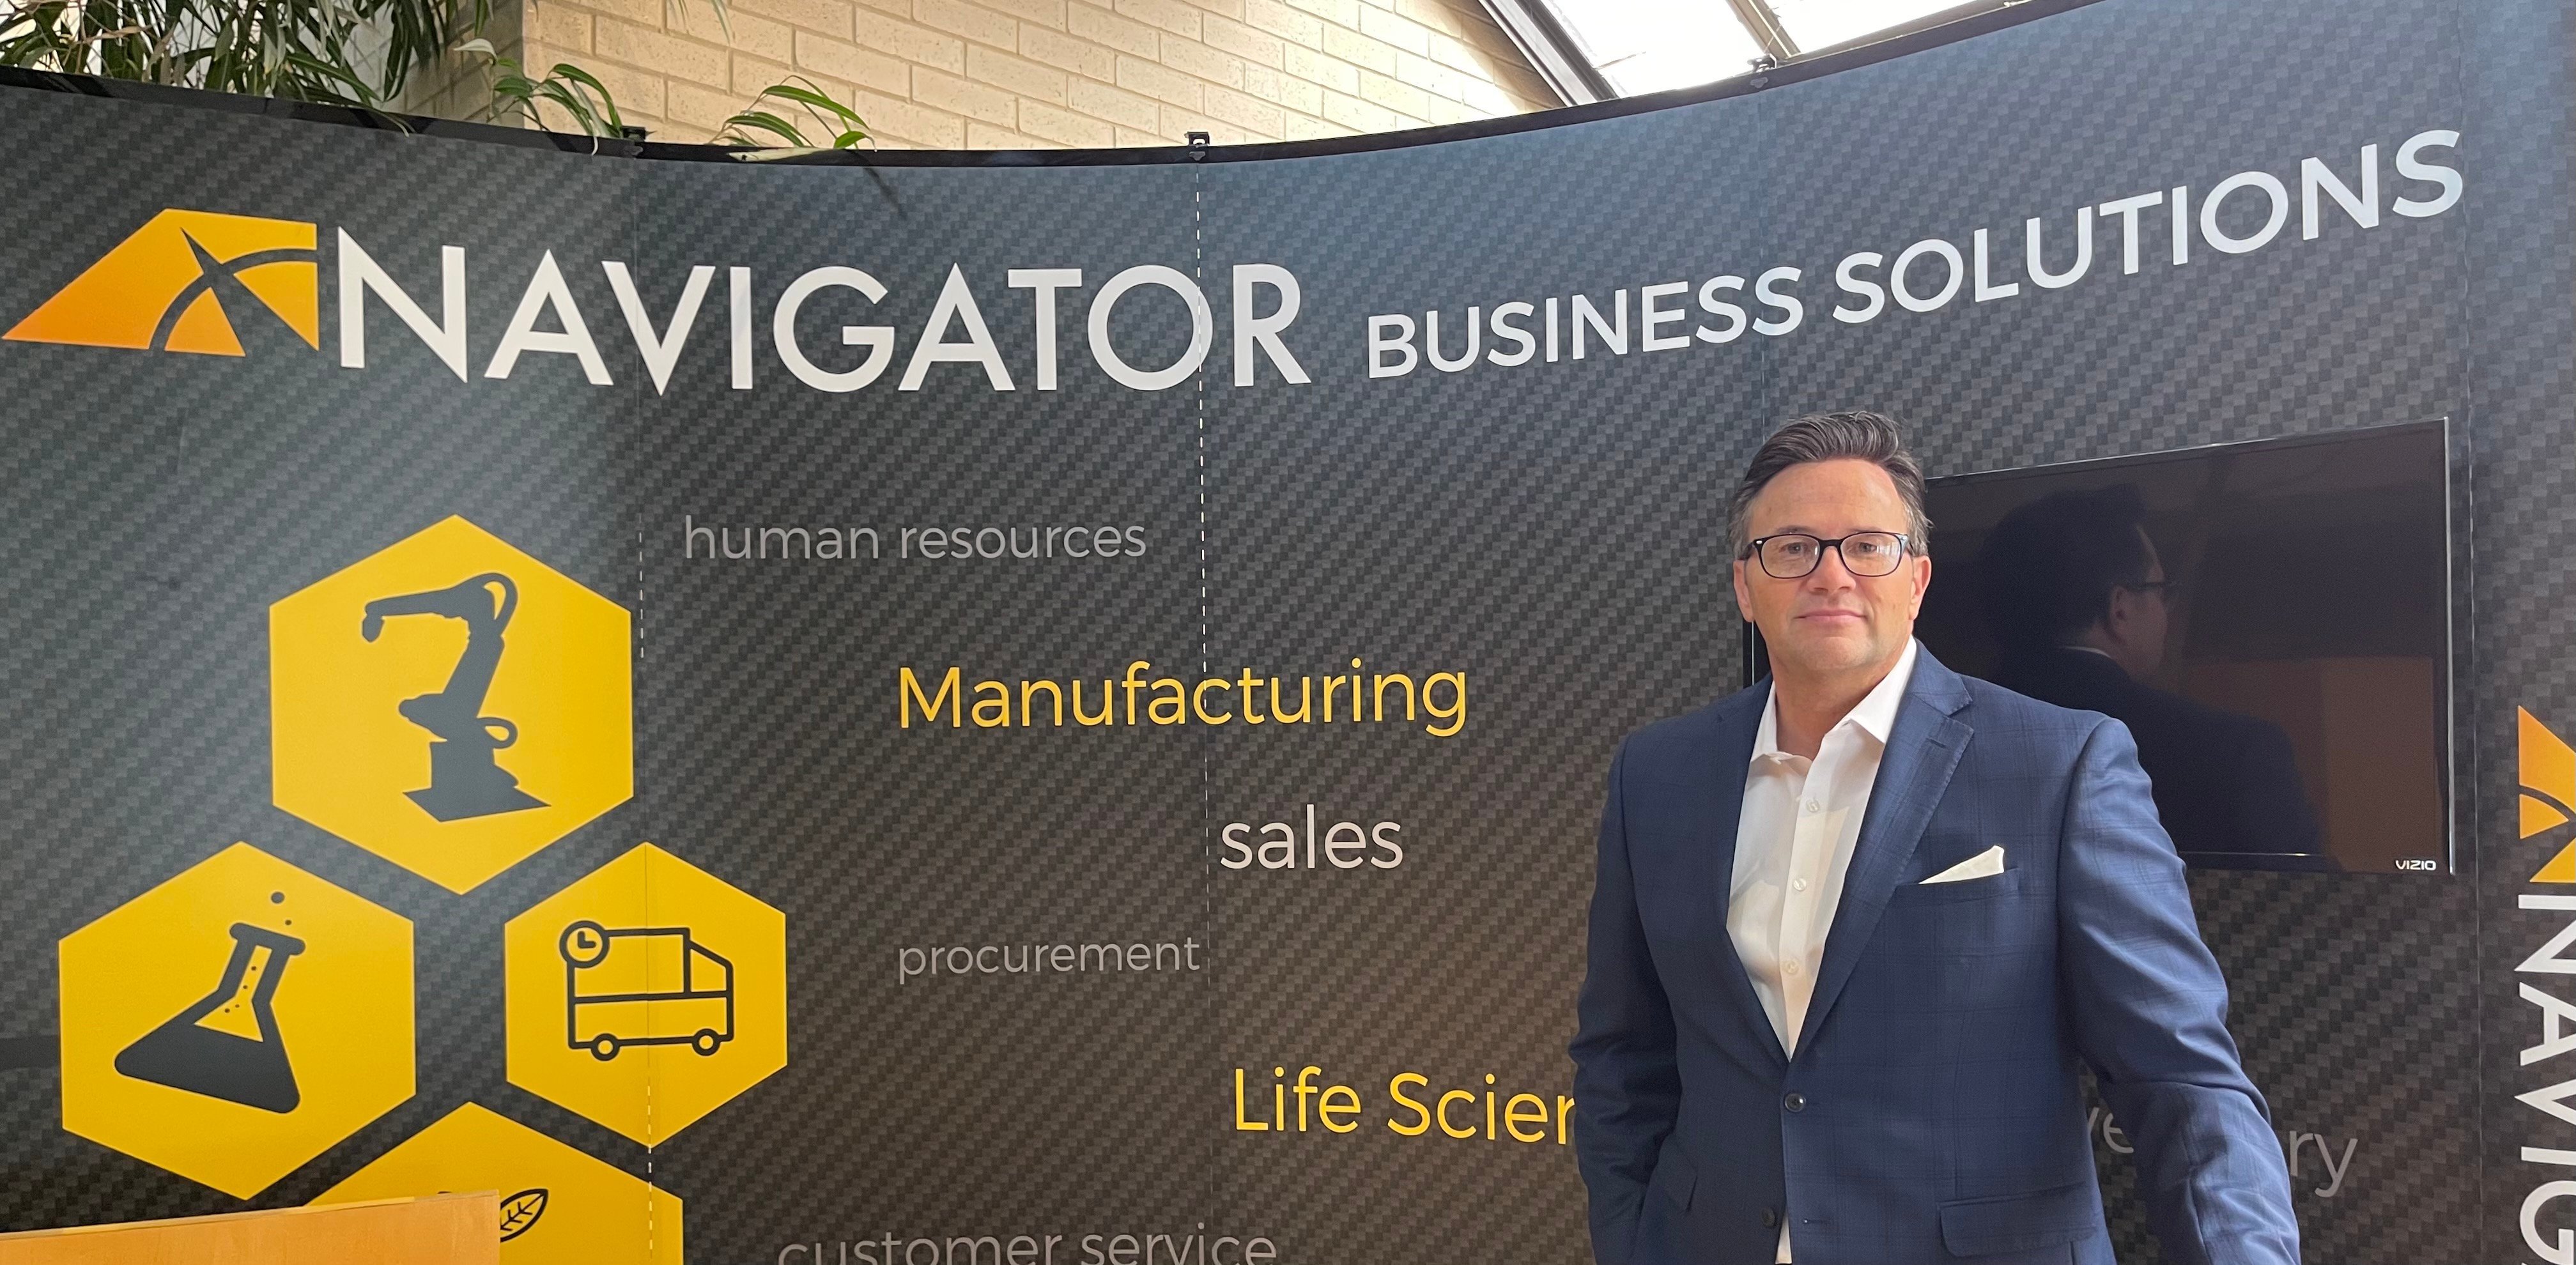 Chris Nielsen, President and CEO at Navigator Business Solutions